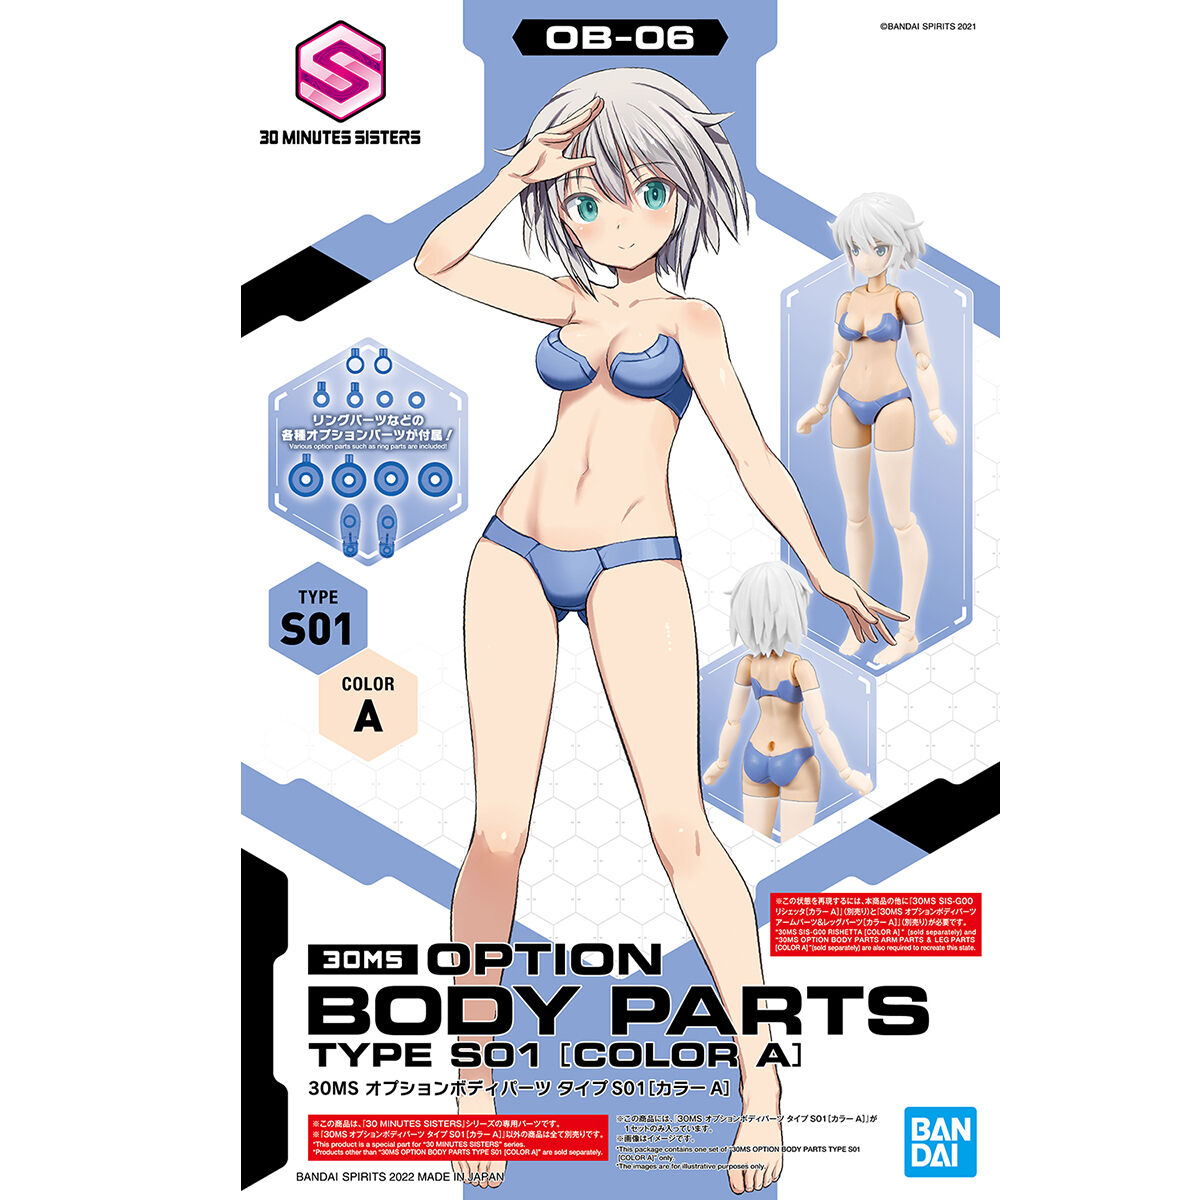 30MS-OPTIONAL-BODY-PARTS-TYPE-S01-COLOR-A